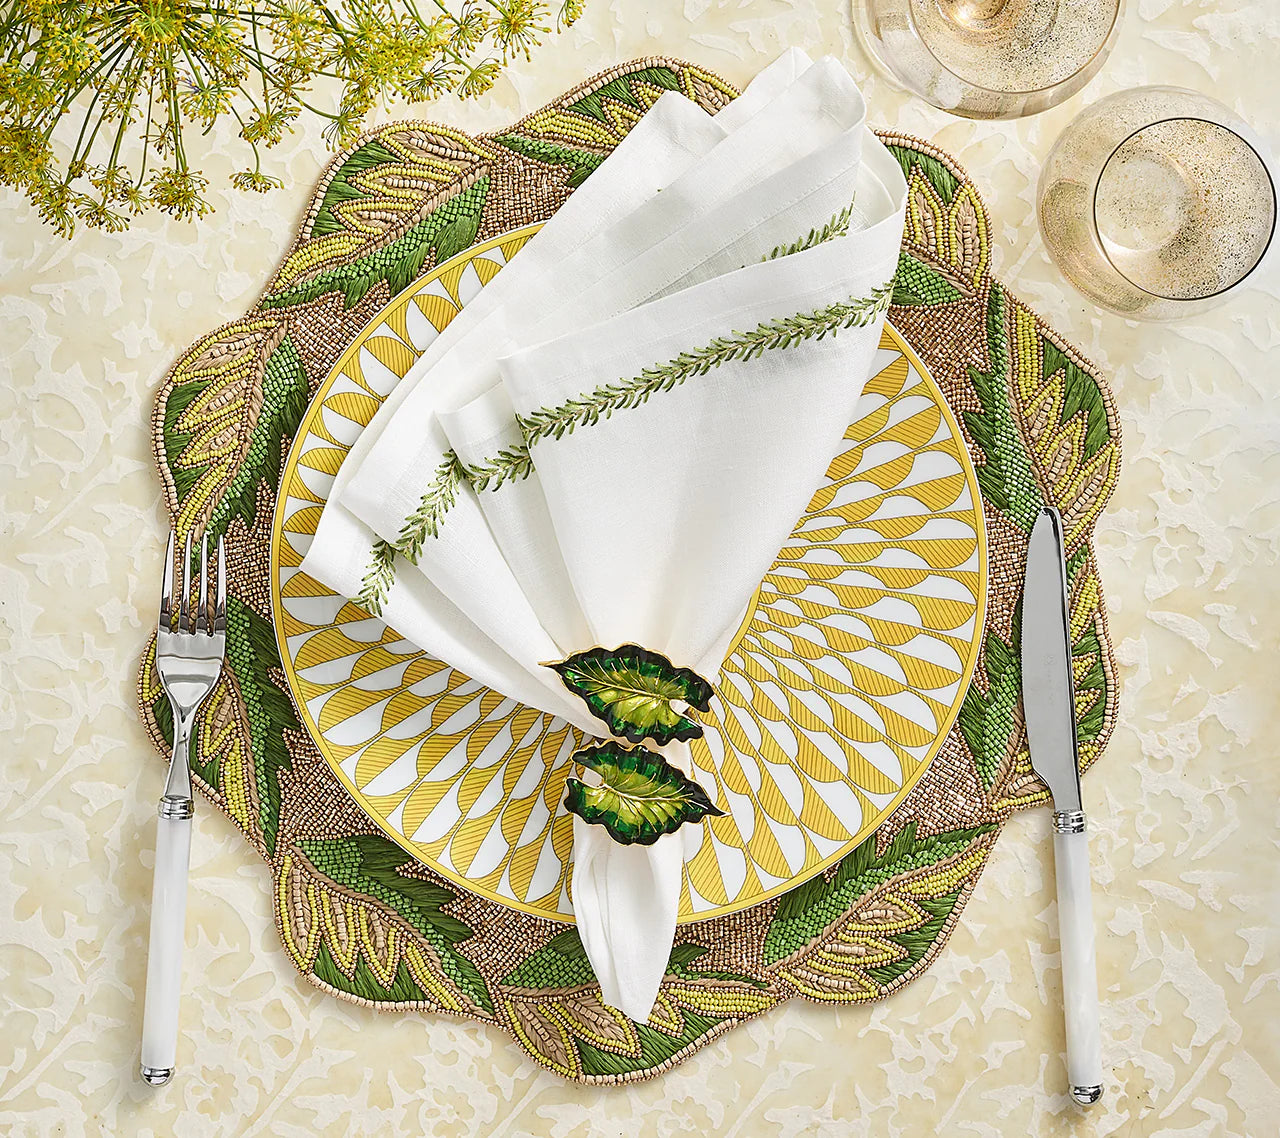 Fern Napkin Ring in Green & Gold, Set of 4 in a Gift Box